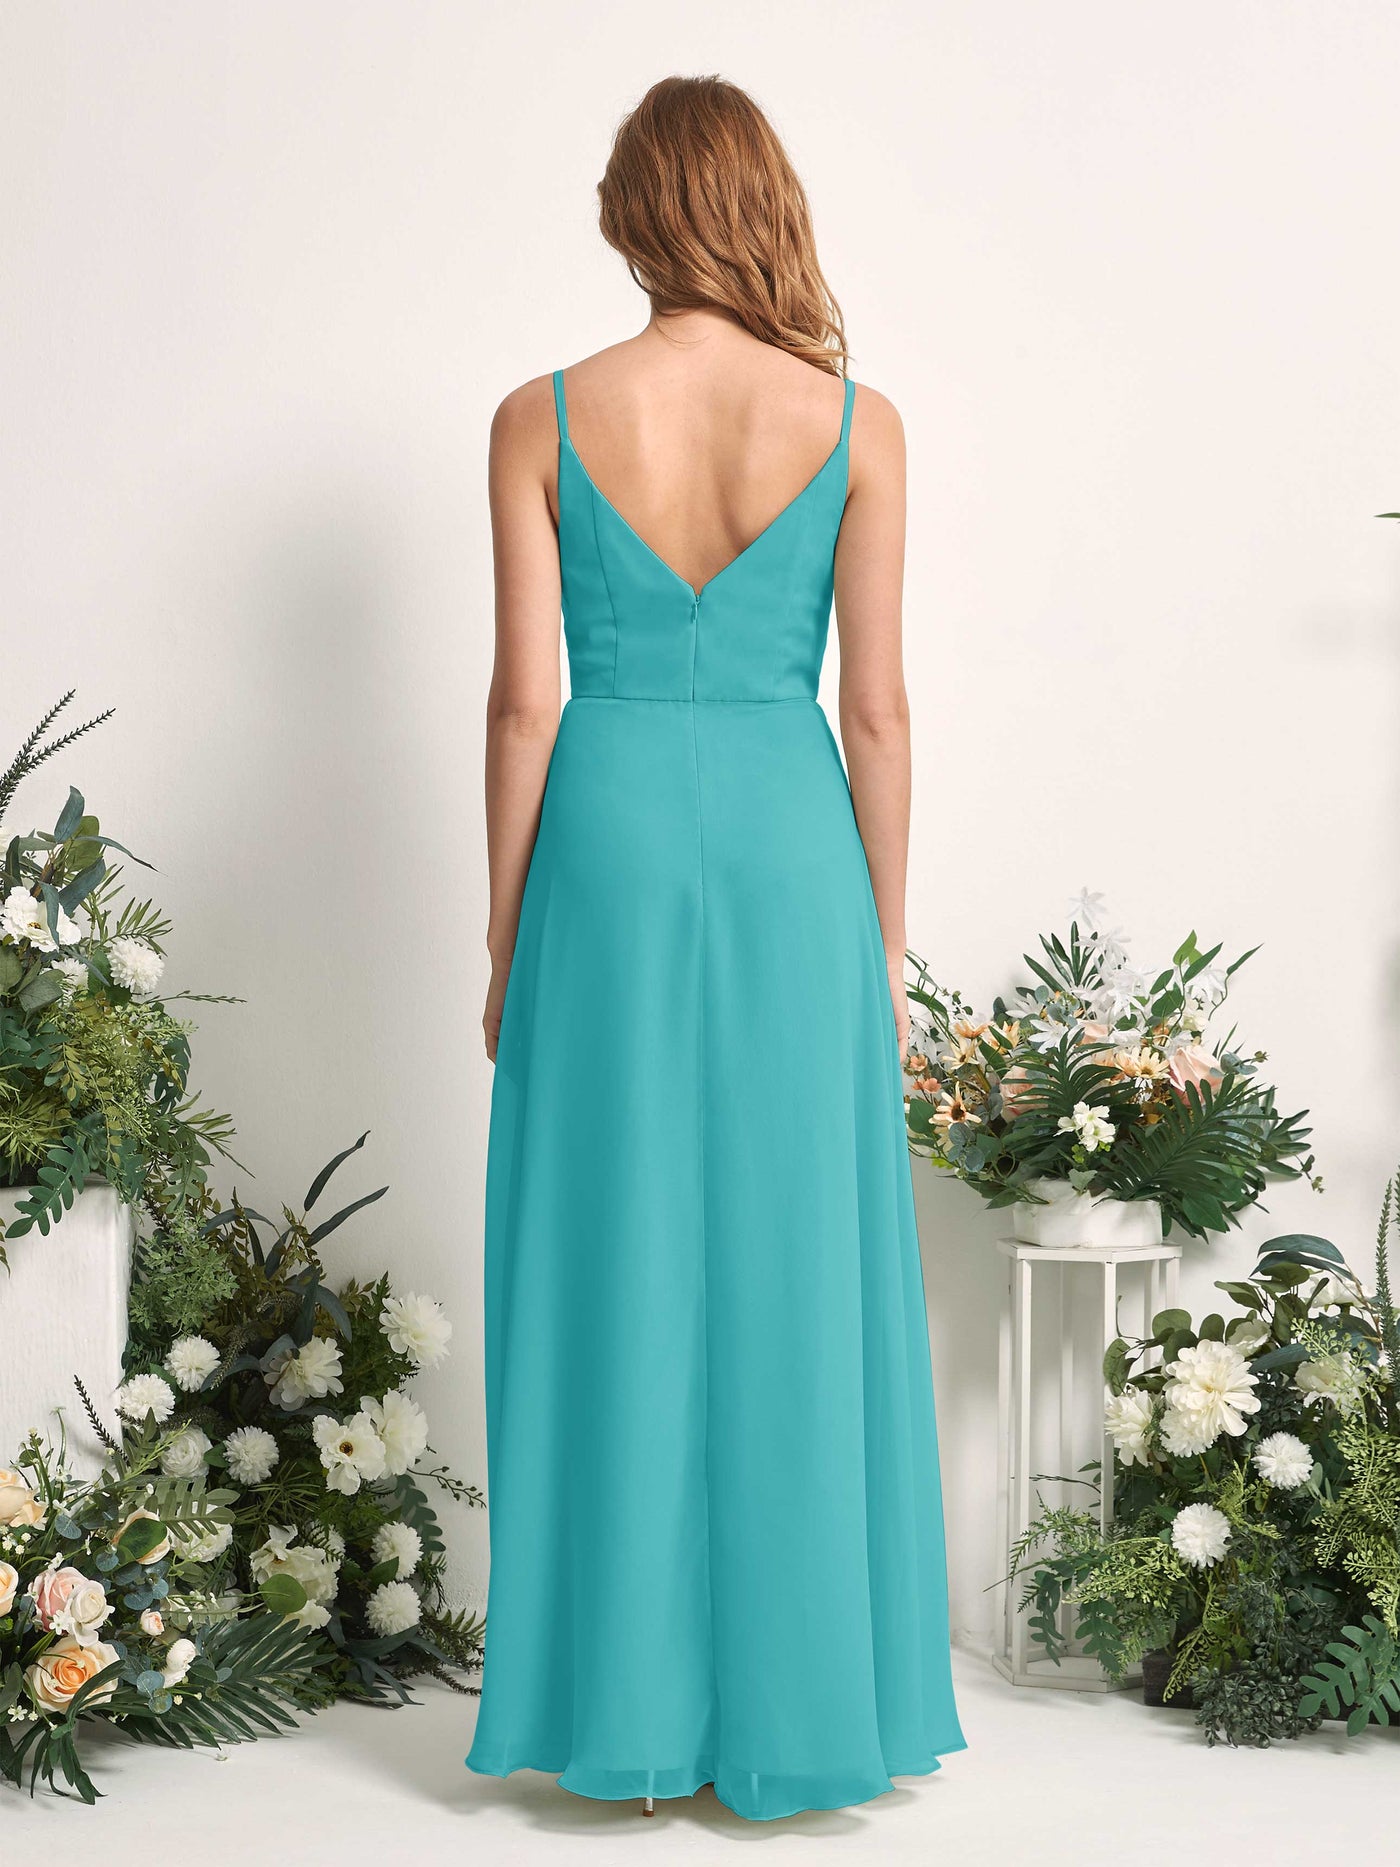 Bridesmaid Dress A-line Chiffon Spaghetti-straps Full Length Sleeveless Wedding Party Dress - Turquoise (81227223)#color_turquoise